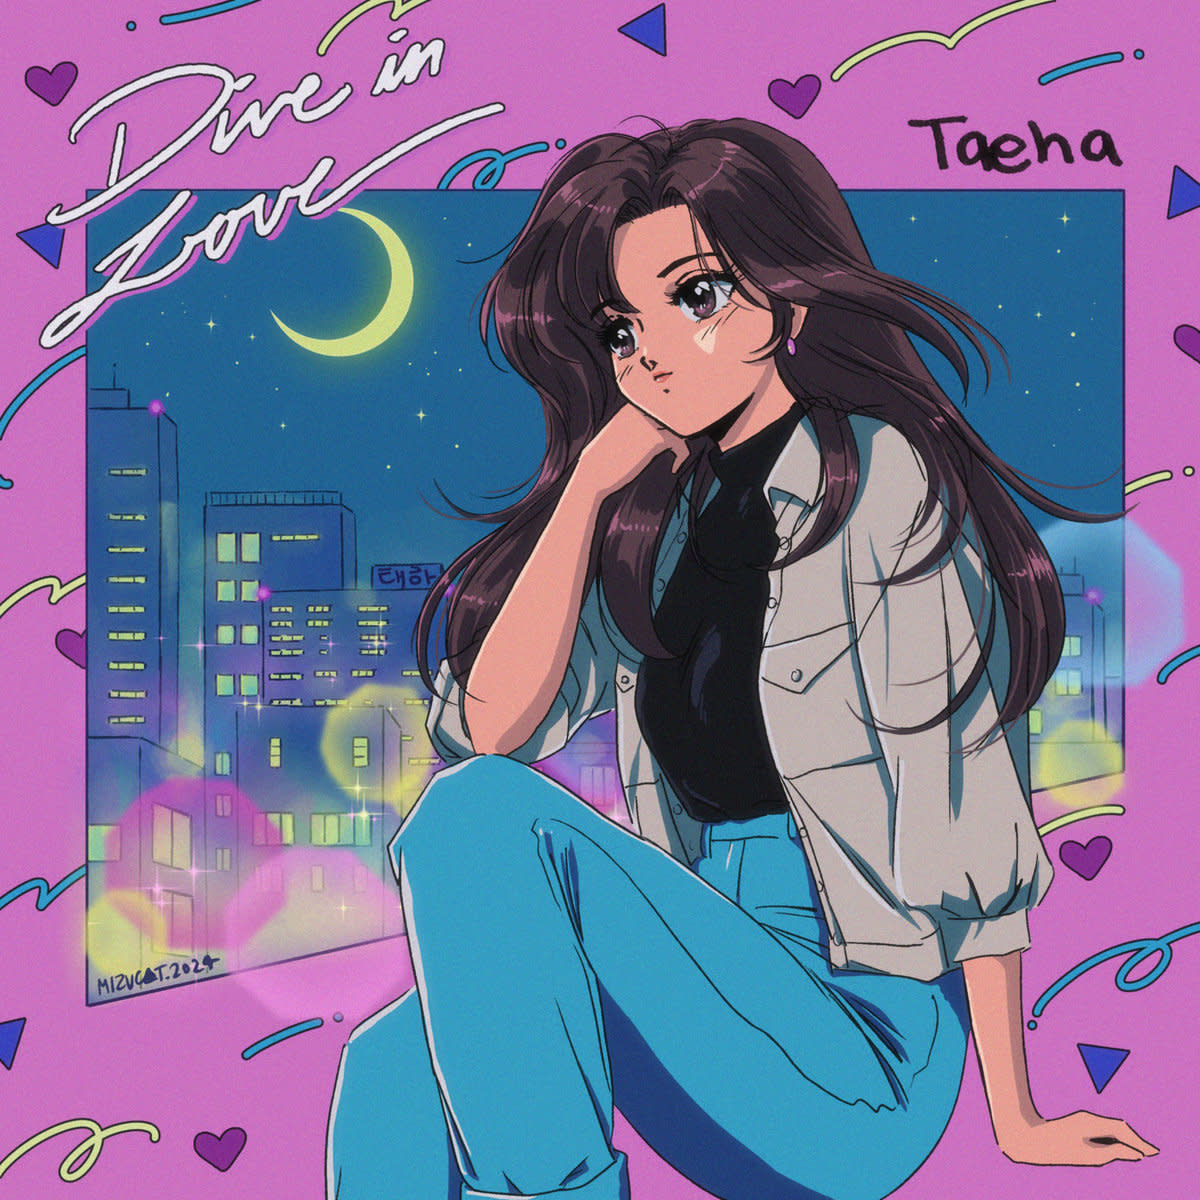 Synth Single Review: “Dive in Love’’ by Taeha